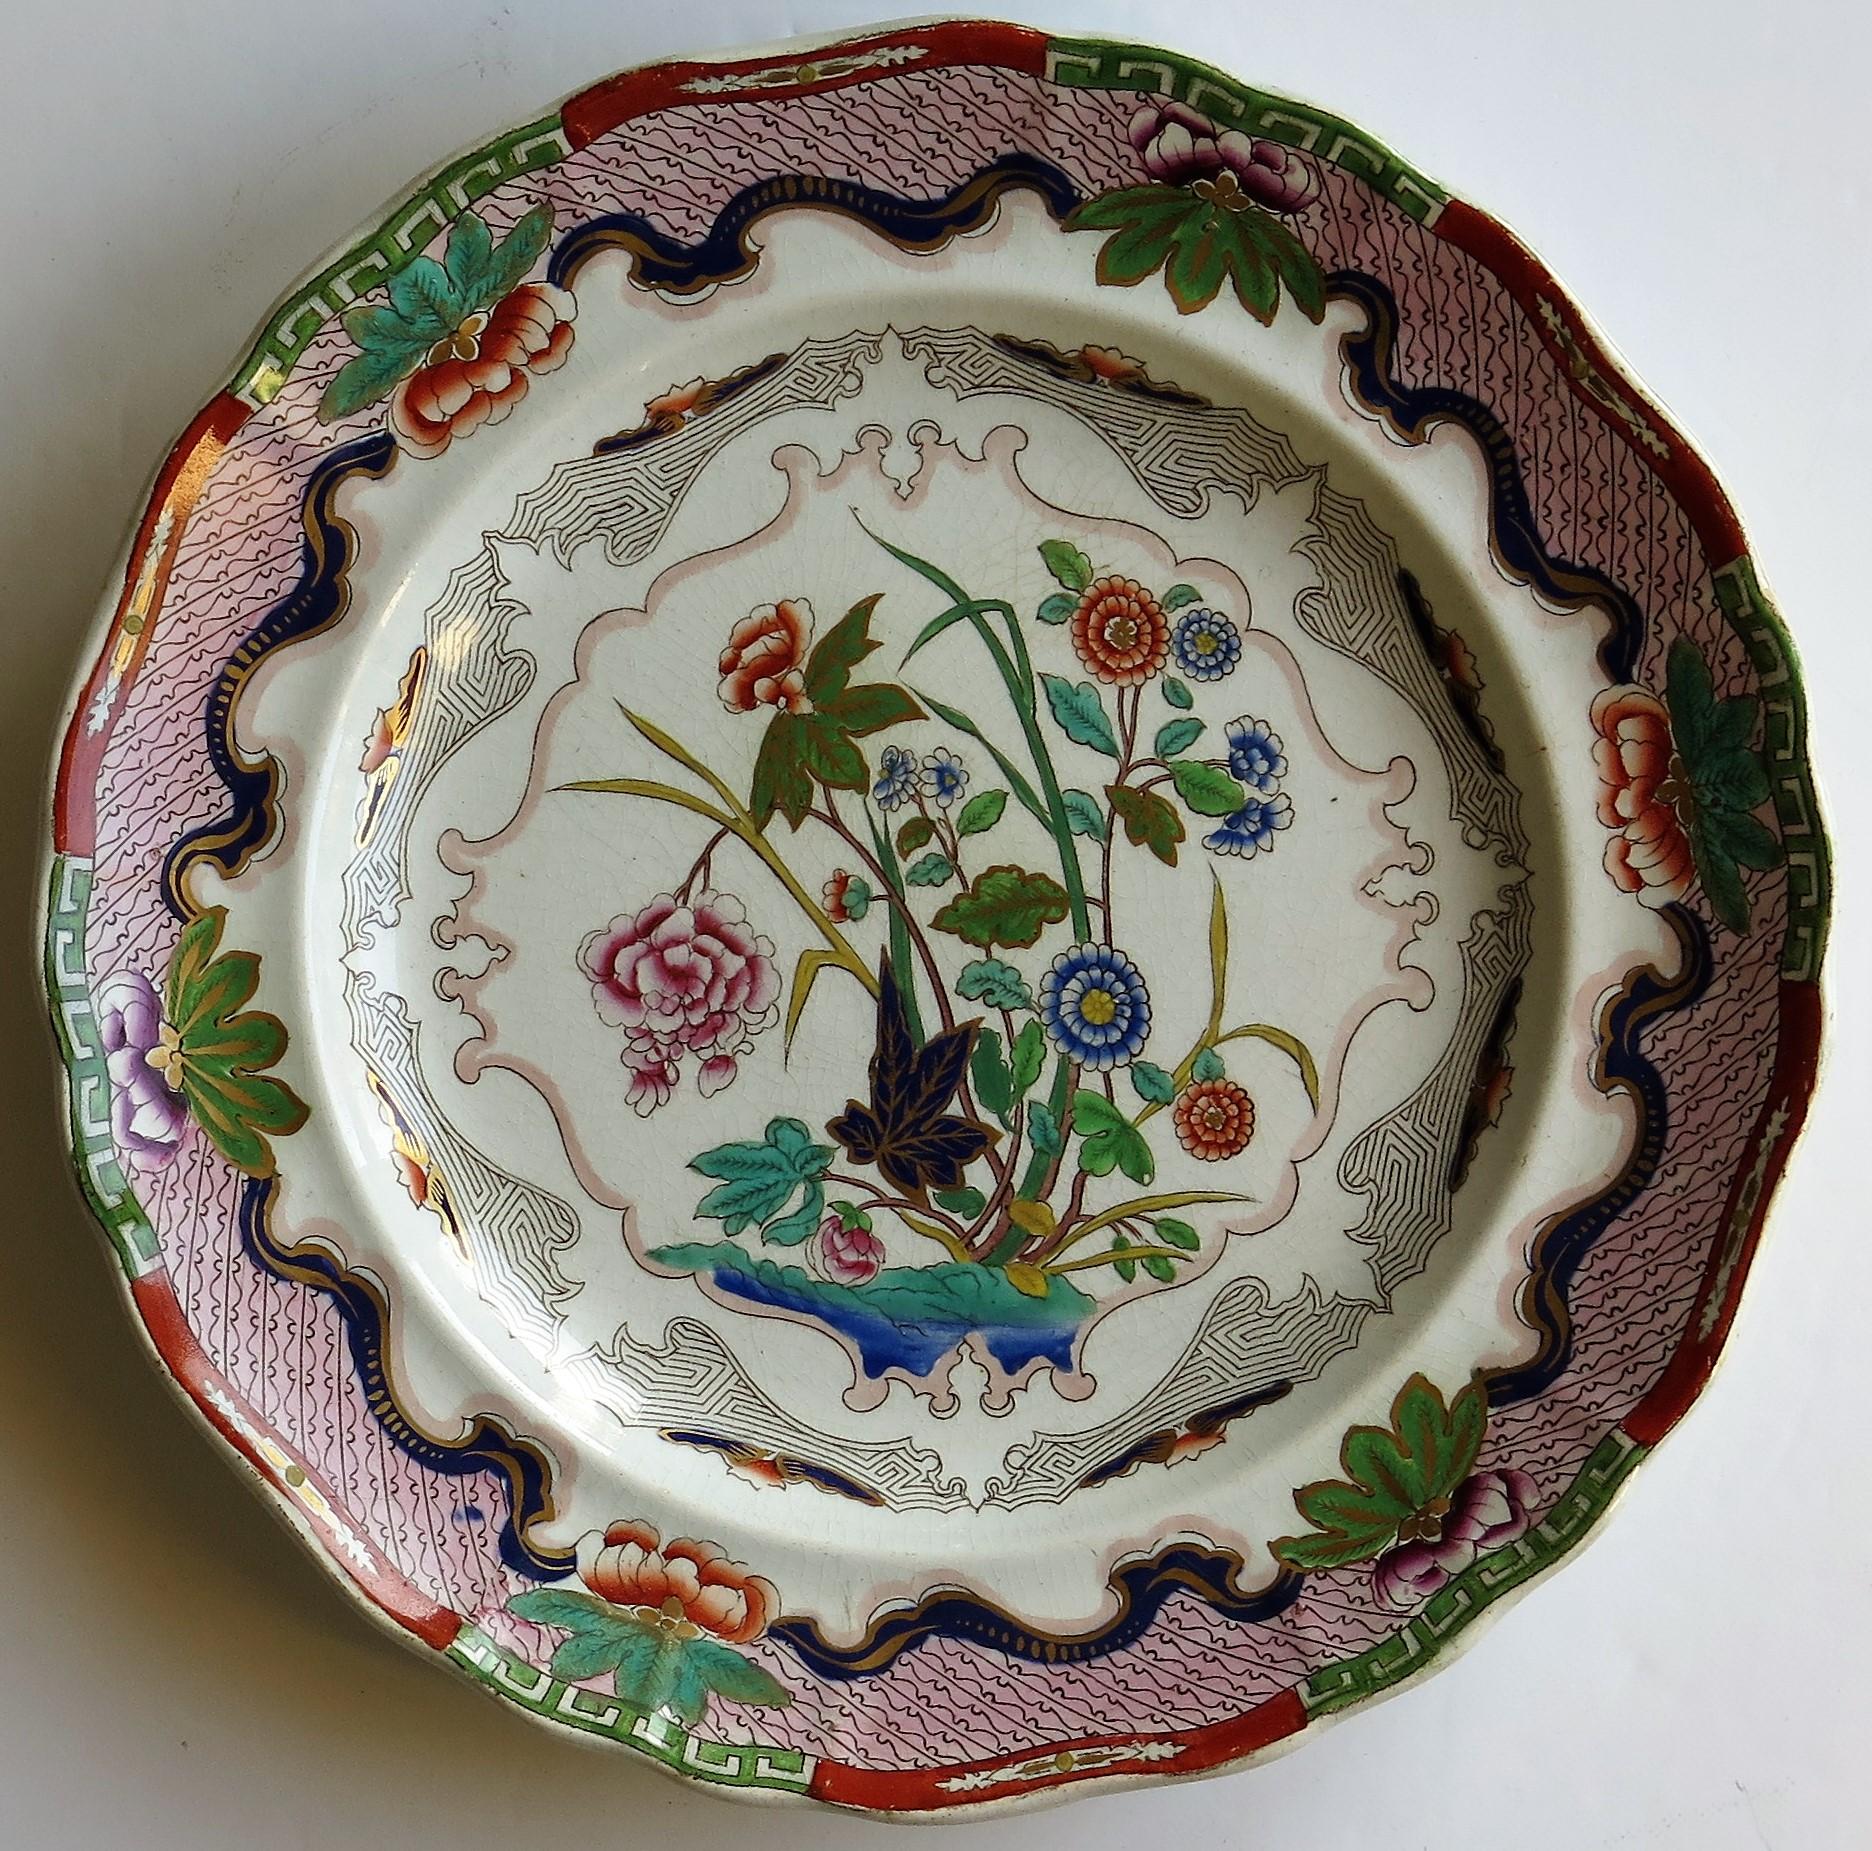 Charles Meigh Ironstone Plate Hand Painted Floral Pattern No. 422, circa 1840 1